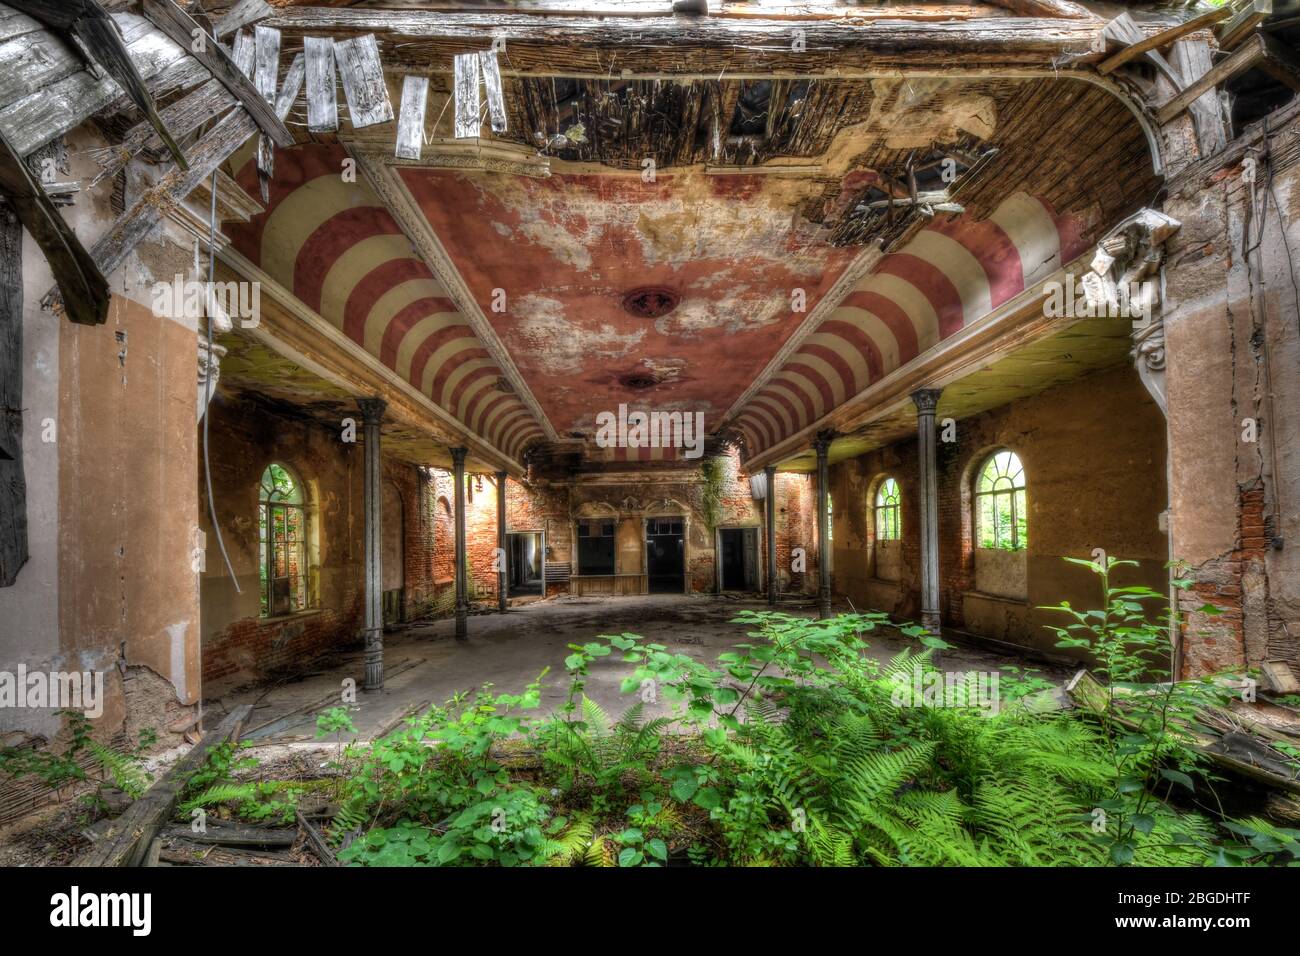 Abandoned Ball Room with pink and white stripes where nature has taken over Stock Photo